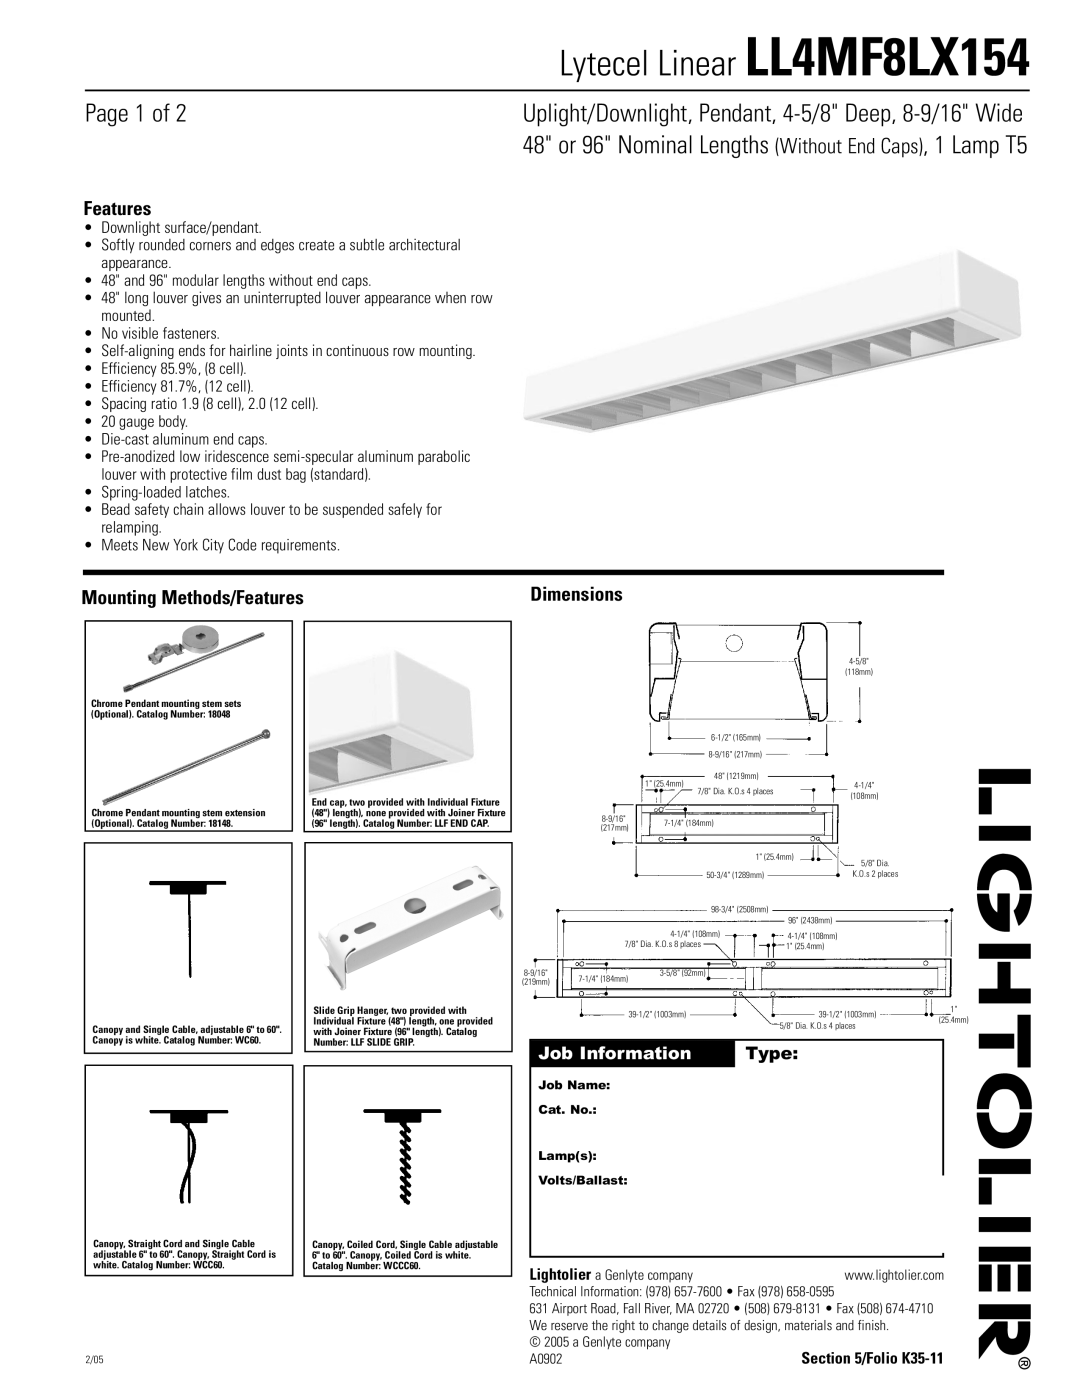 Lightolier LL4MF8LX154 dimensions Page 1 of, Uplight/Downlight, Pendant, 4-5/8Deep, 8-9/16Wide, Features, Job Information 